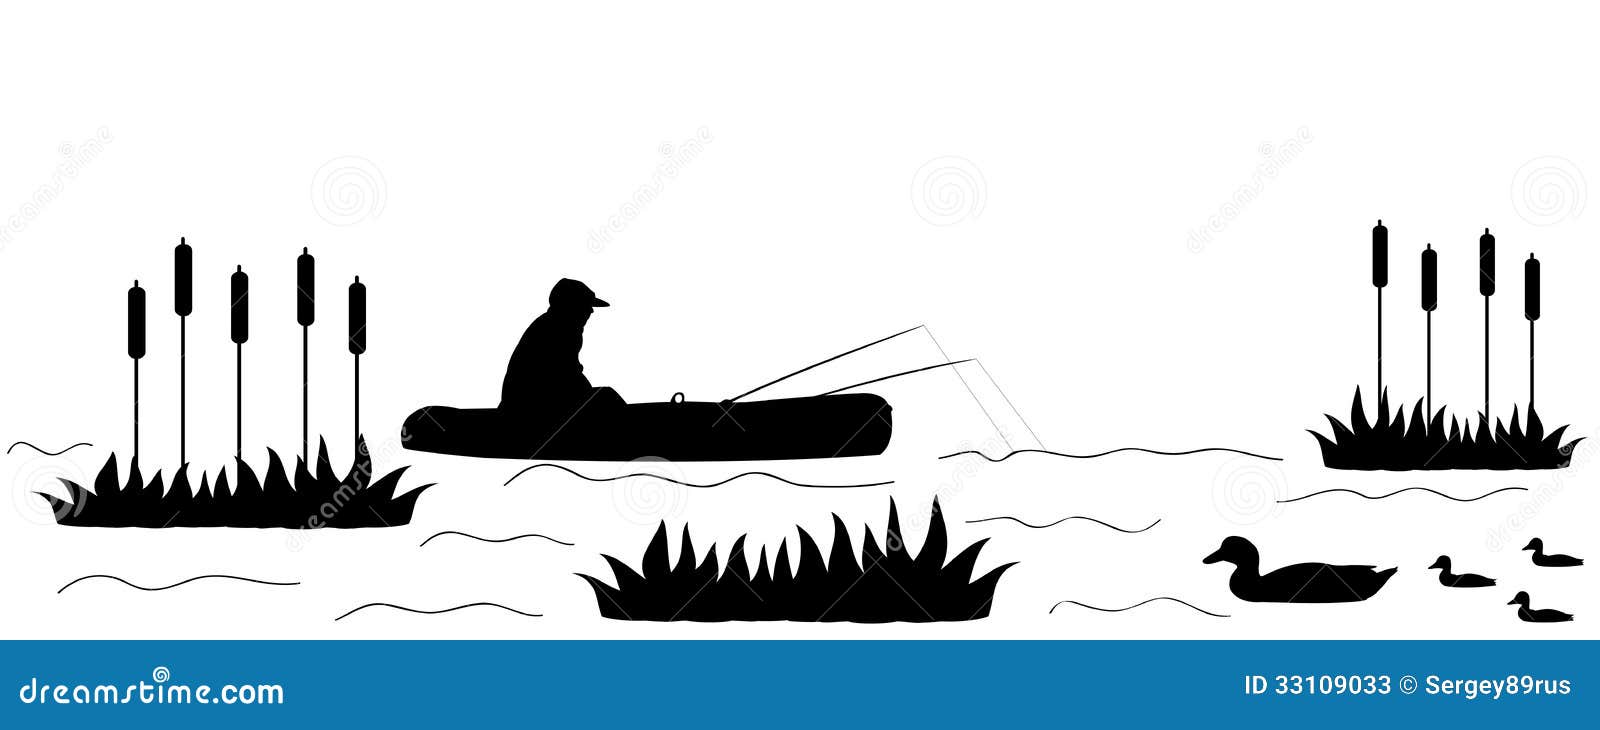 Download Silhouette The Fisherman On The Lake. Stock Vector ...